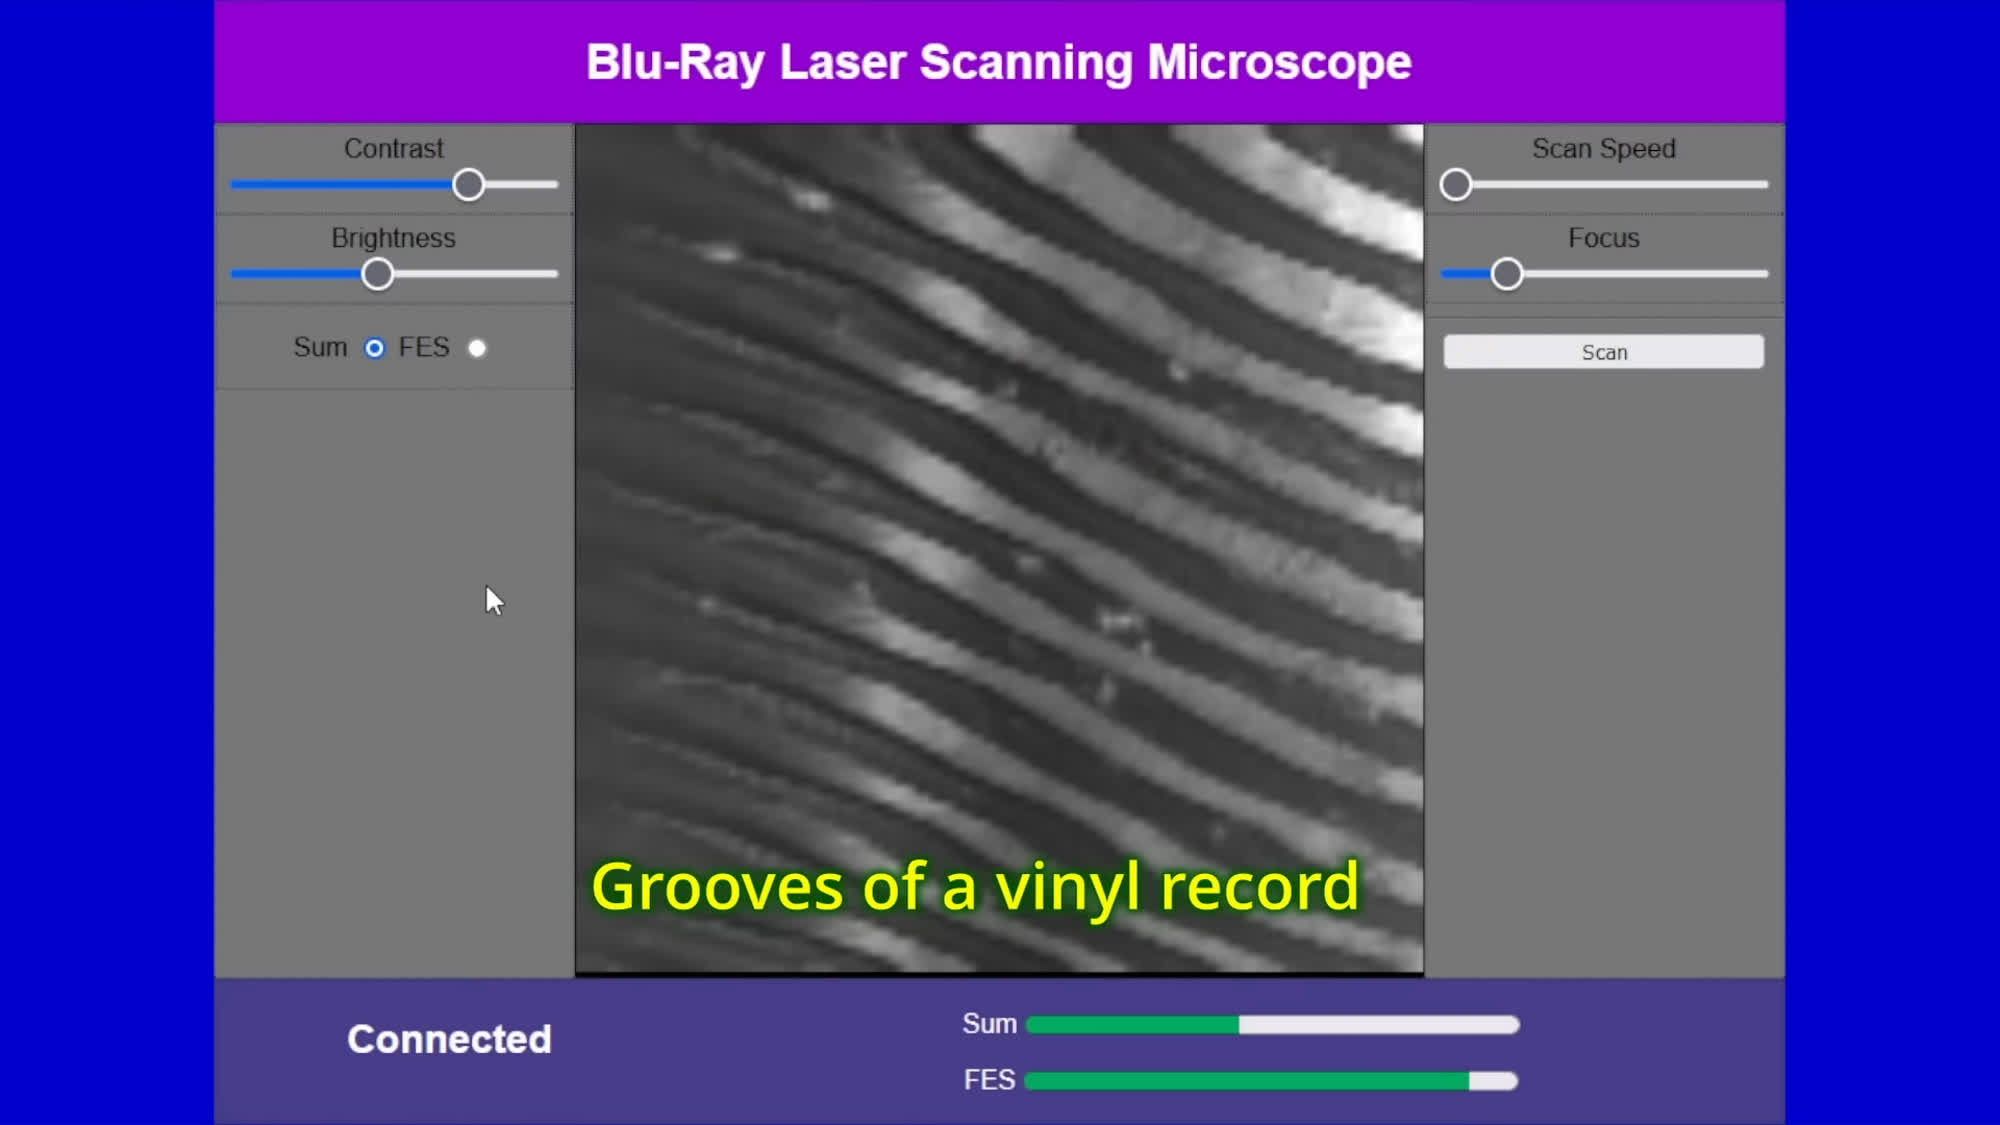 inoxidable Confiar enviar Turning Blu-ray player parts into a cheap laser-scanning microscope |  TechSpot